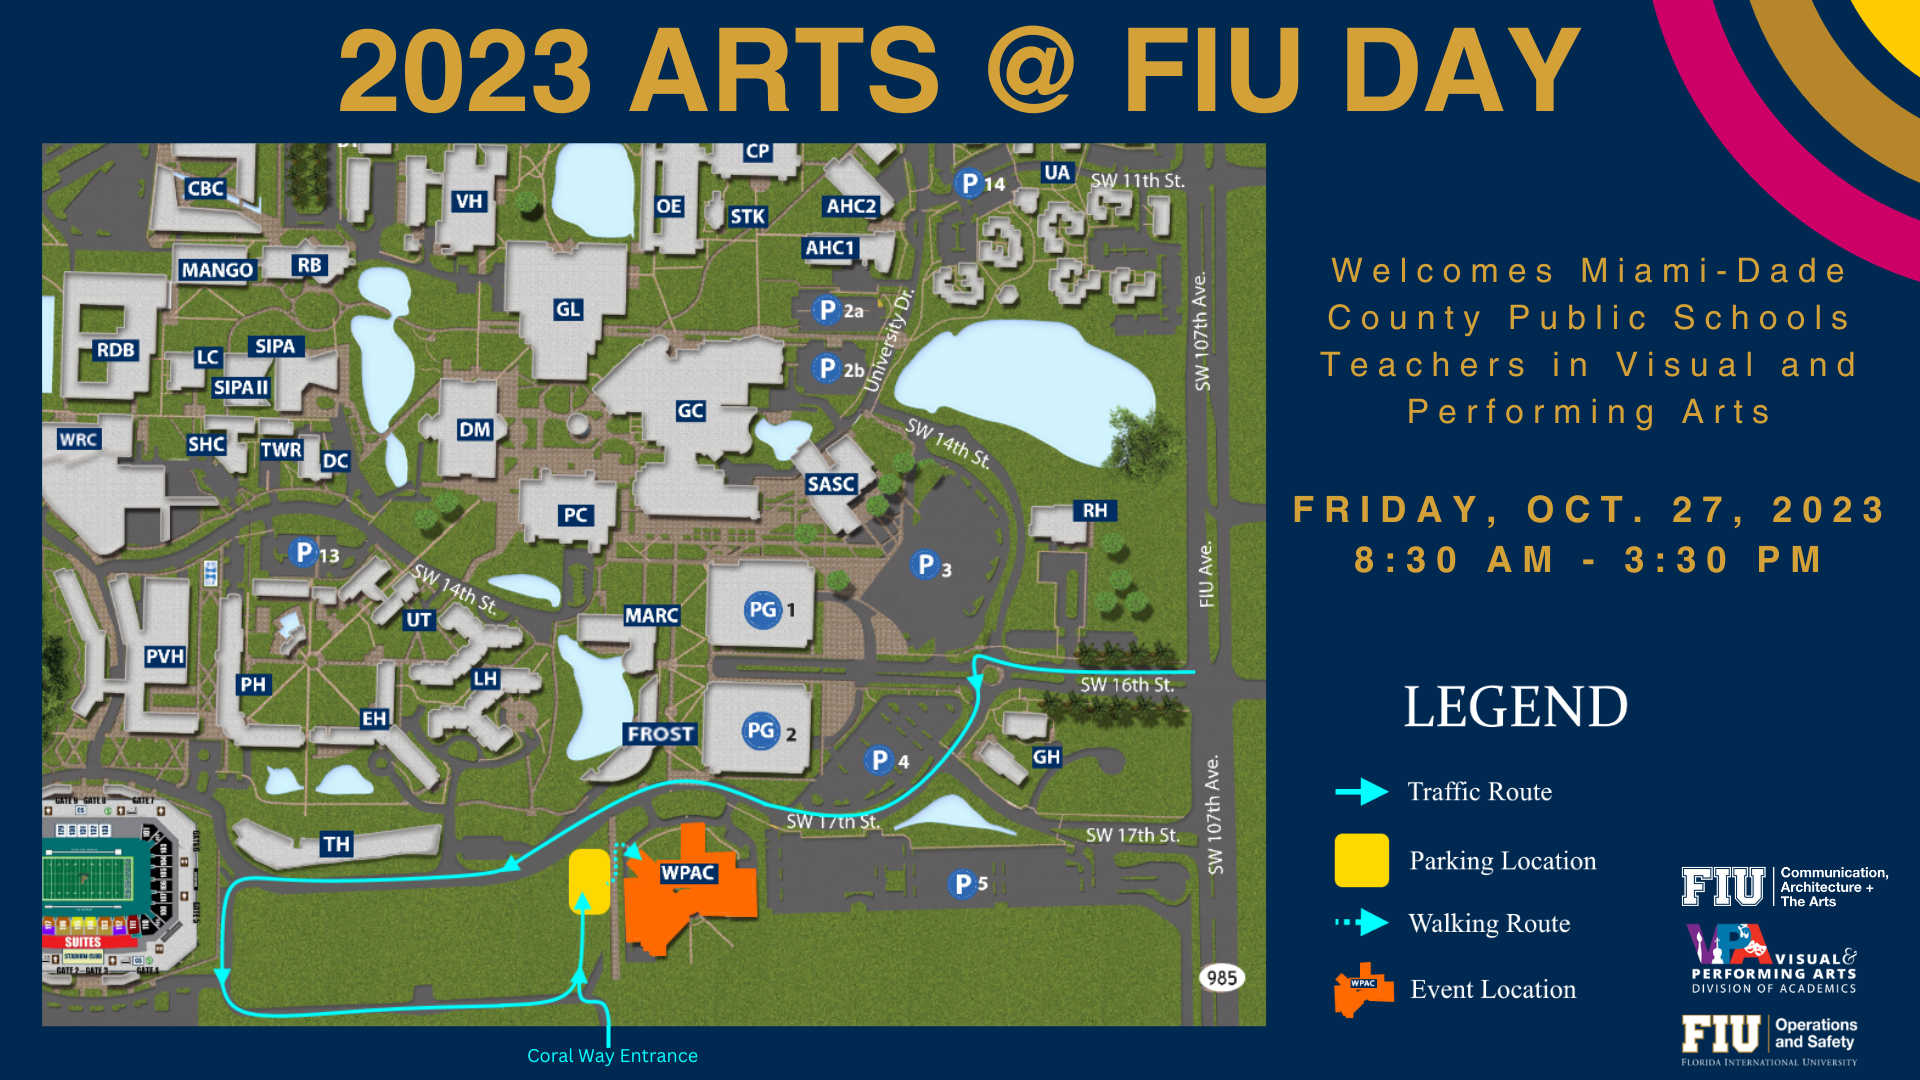 Arts @ FIU Day flyer (6)